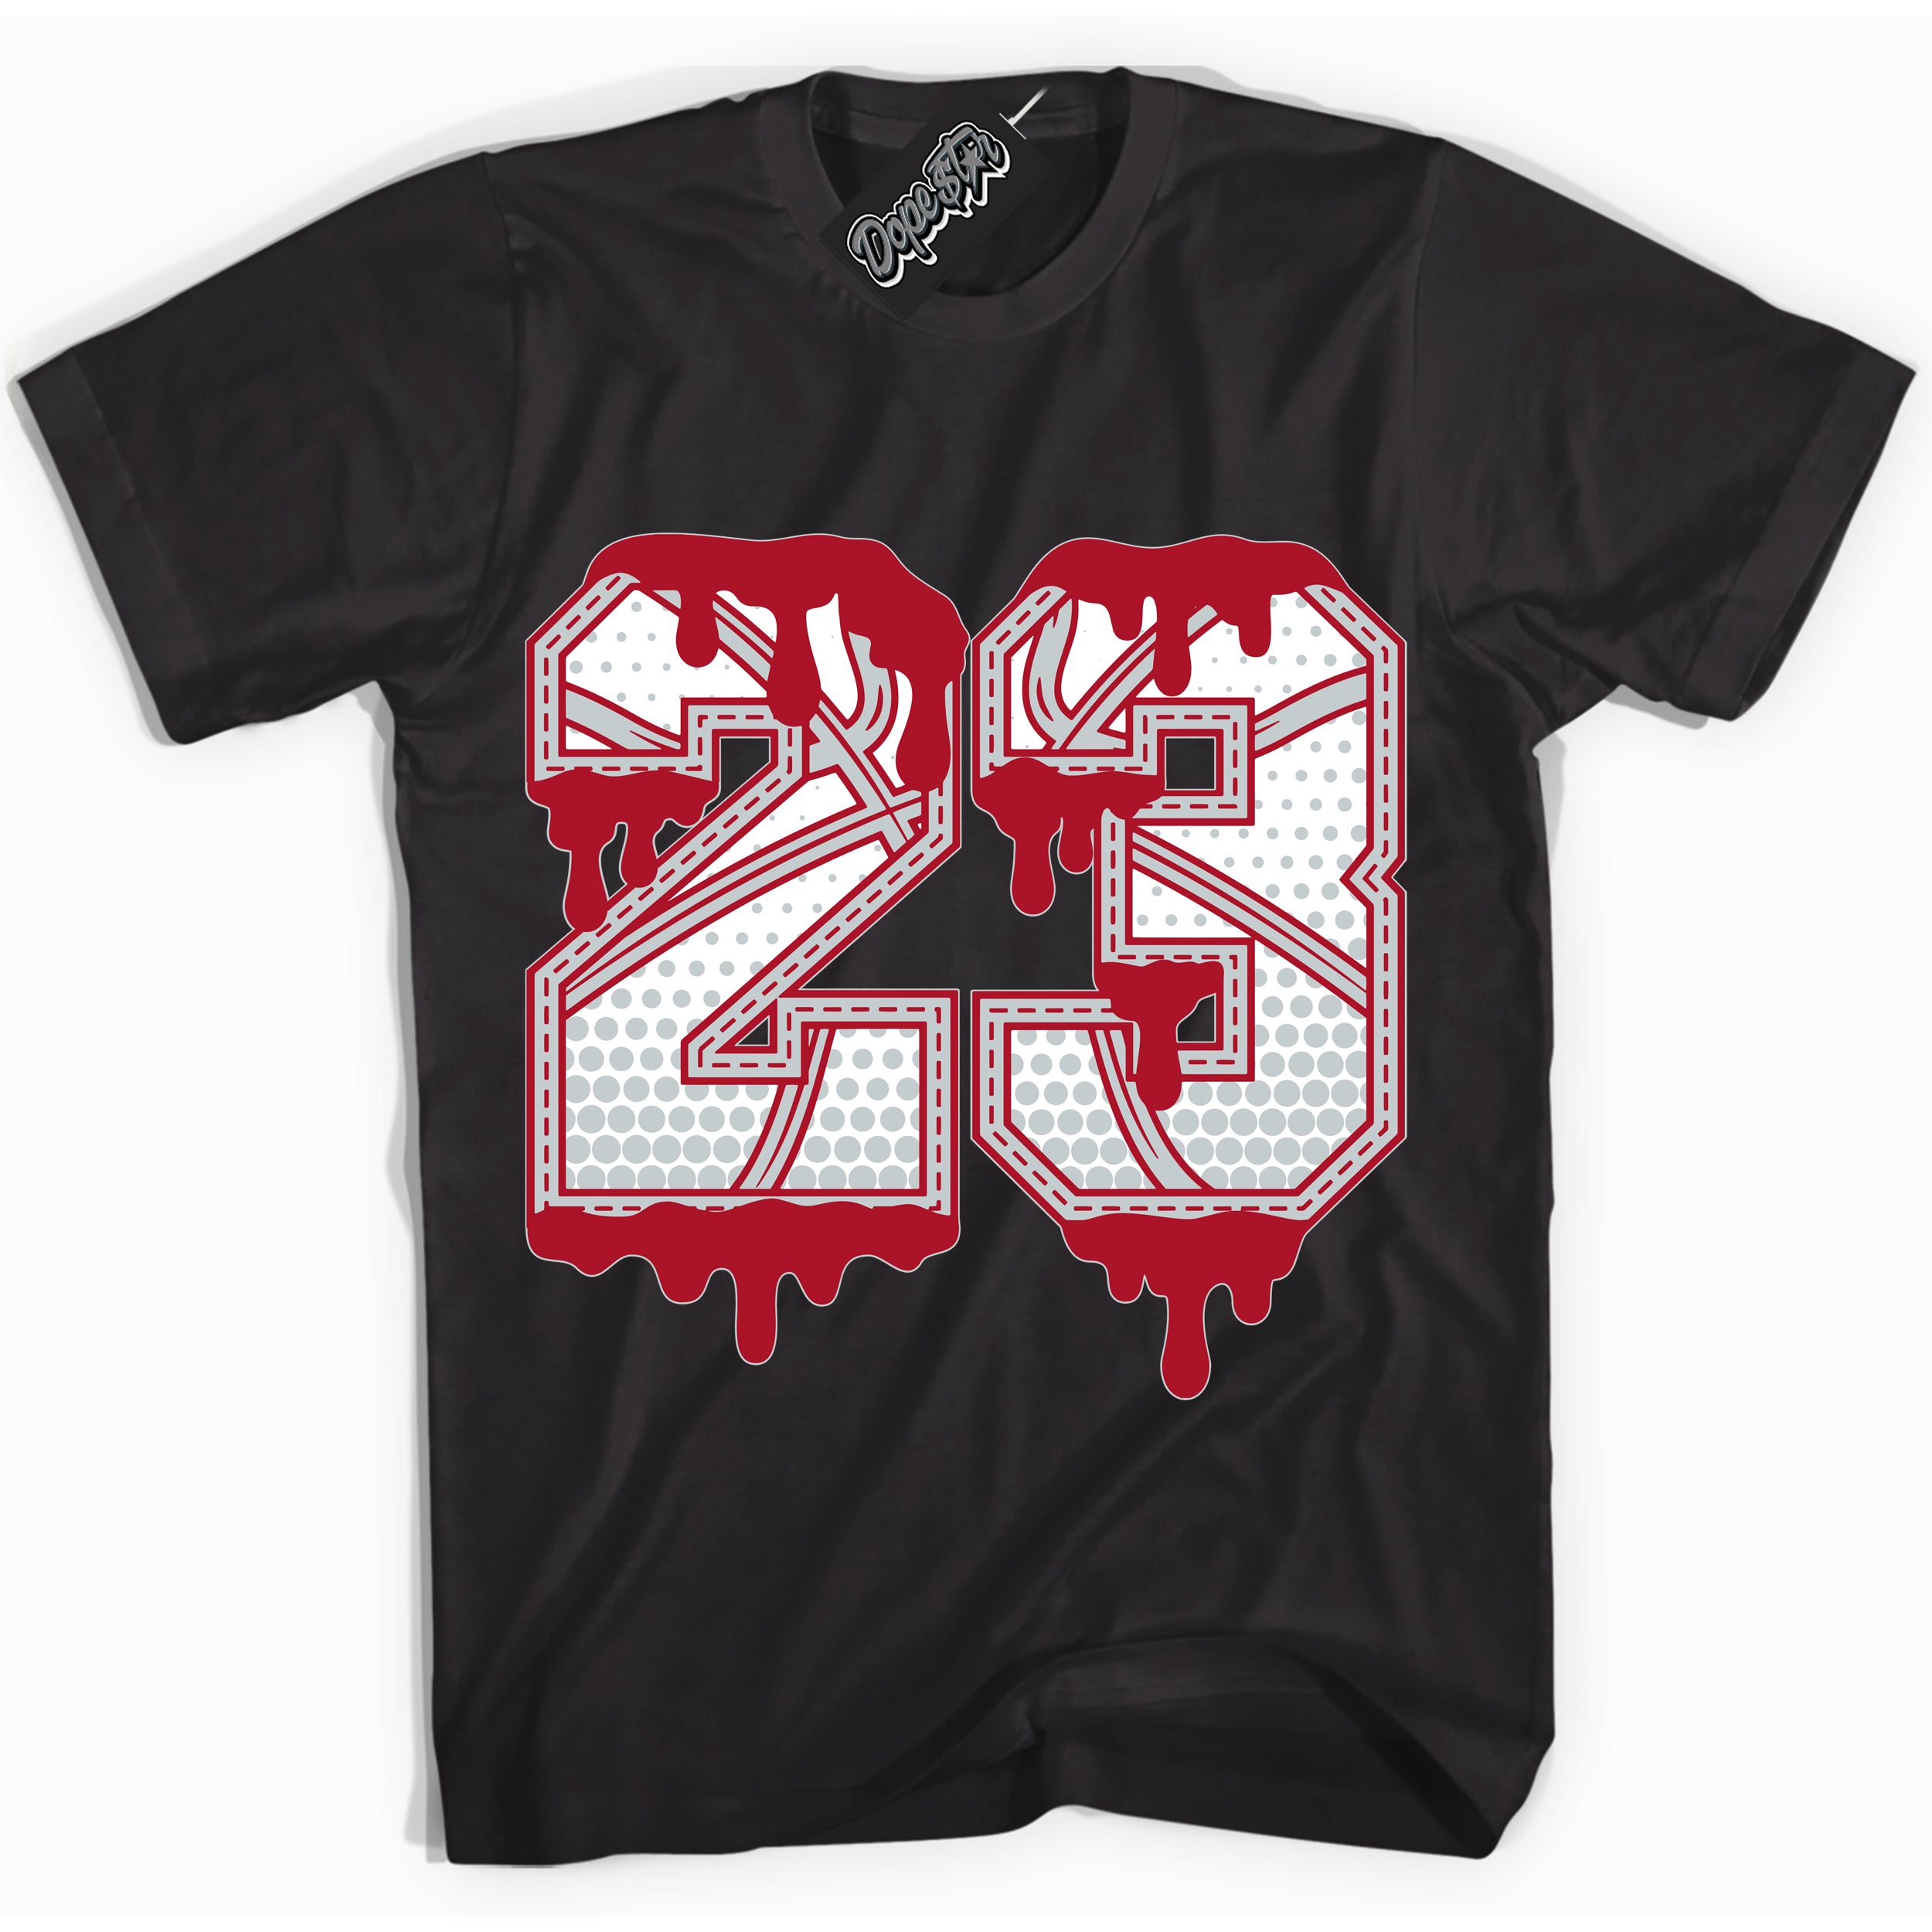 Cool Black Shirt with “ 23 Ball” design that perfectly matches Reverse Ultraman Sneakers.